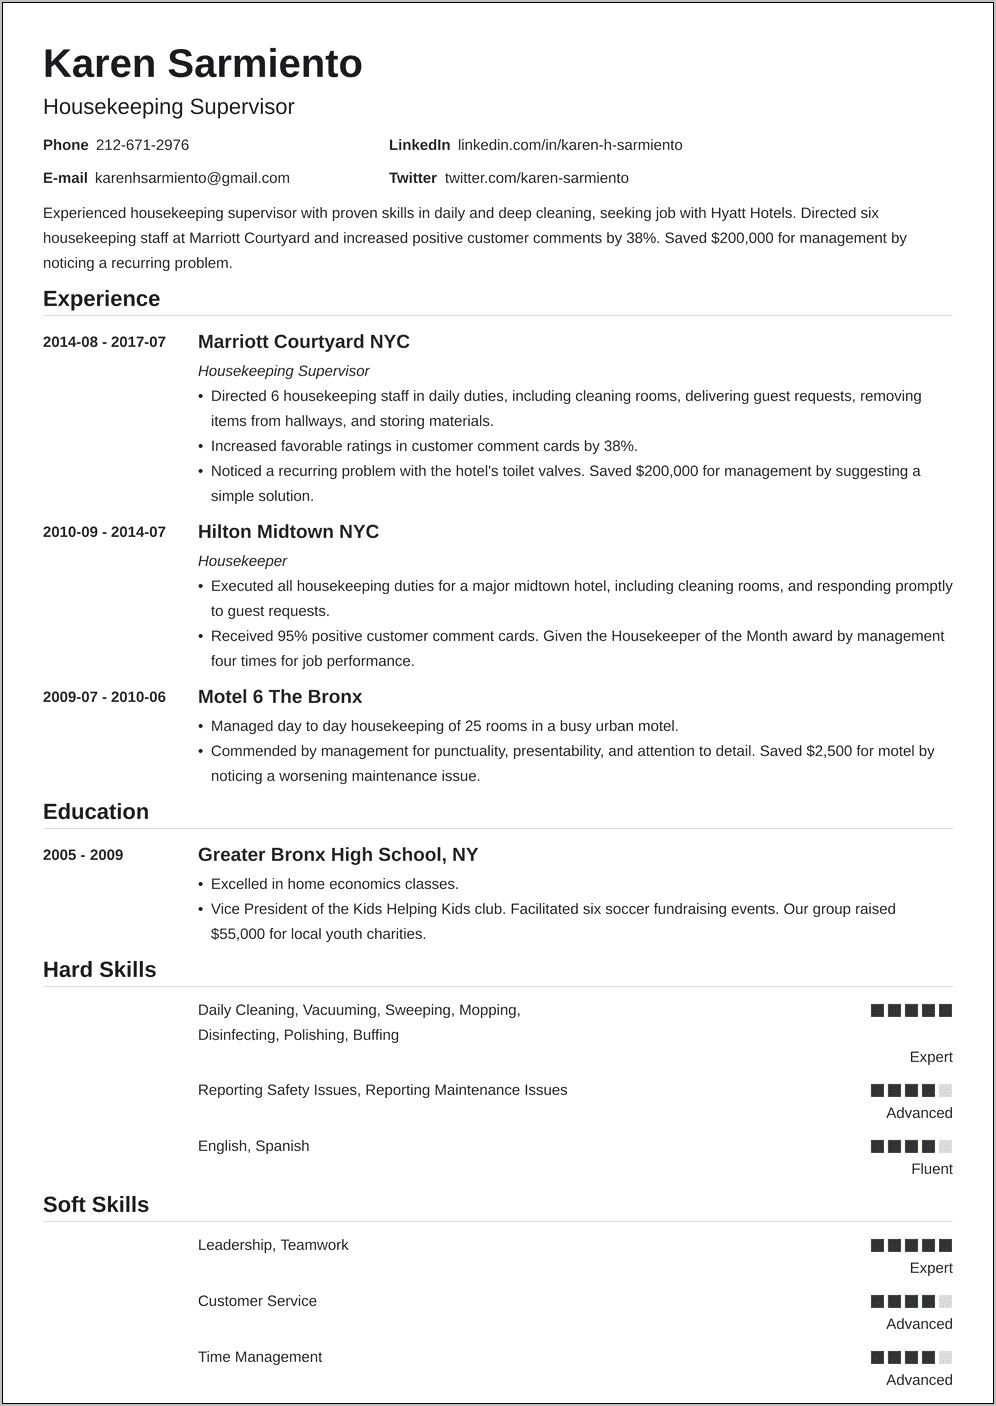 Apply For Housekeeping Job At Hotel Resume